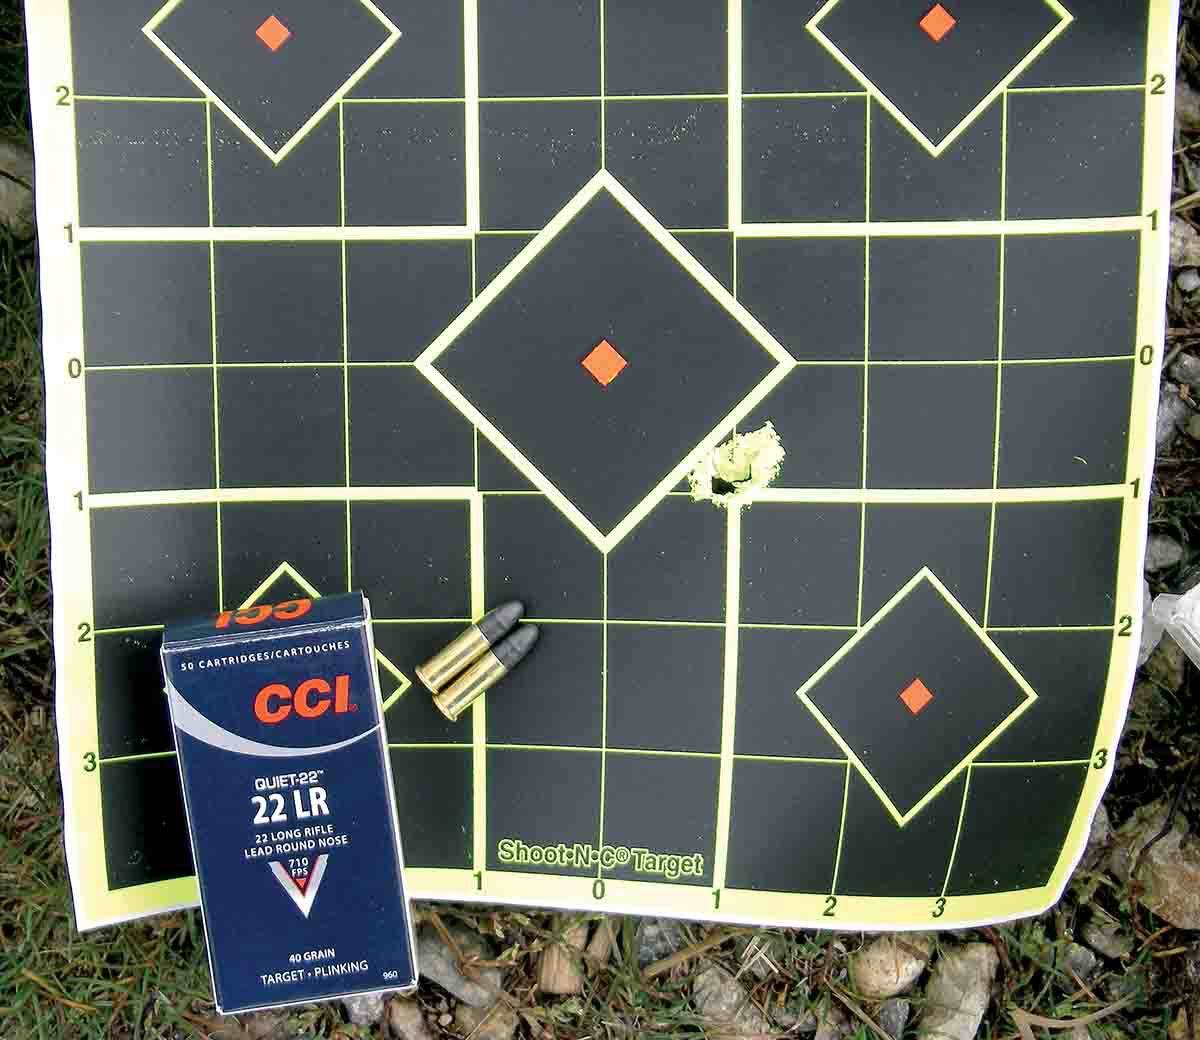 This five-shot group fired at 25 yards with CCI Quiet-22 ammunition measured .308 inch.